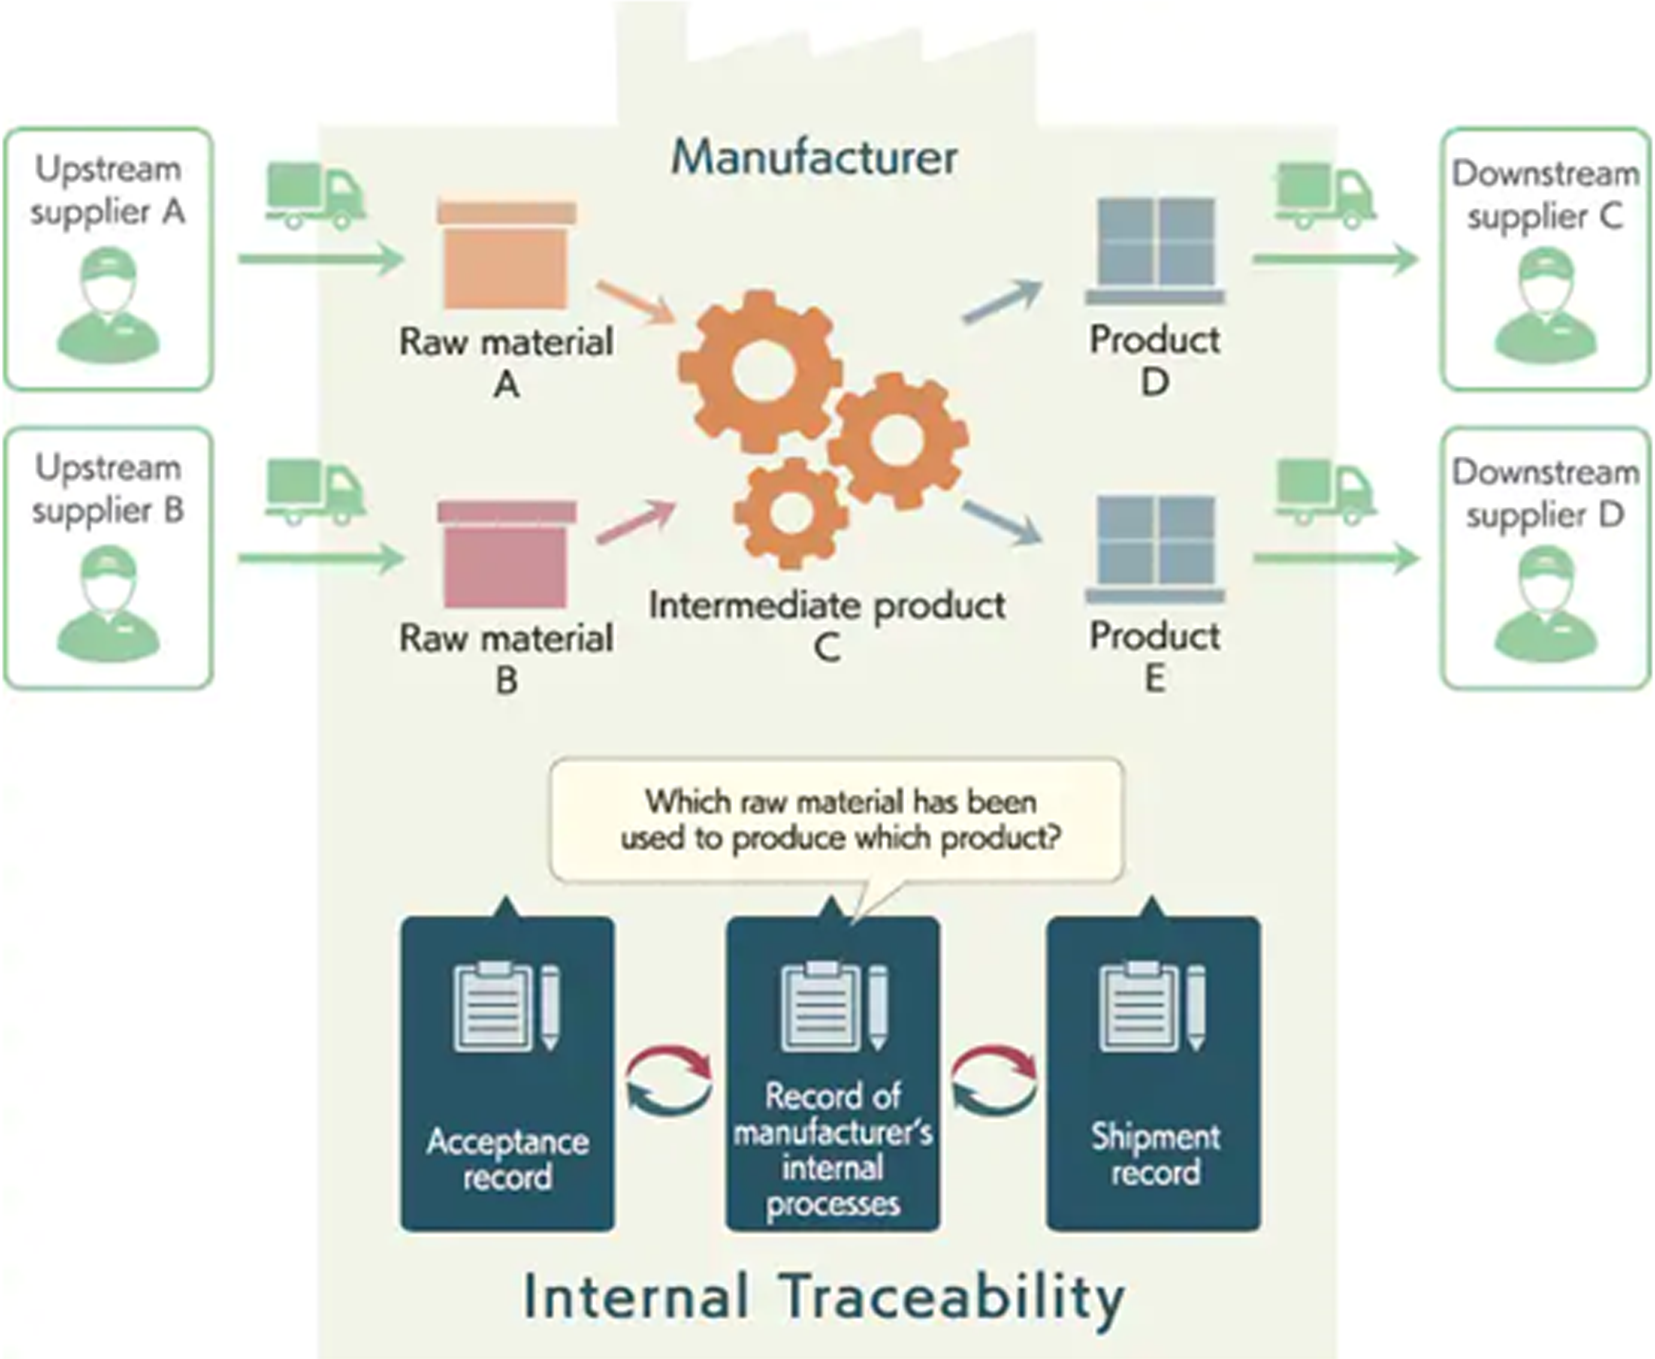 Tracability